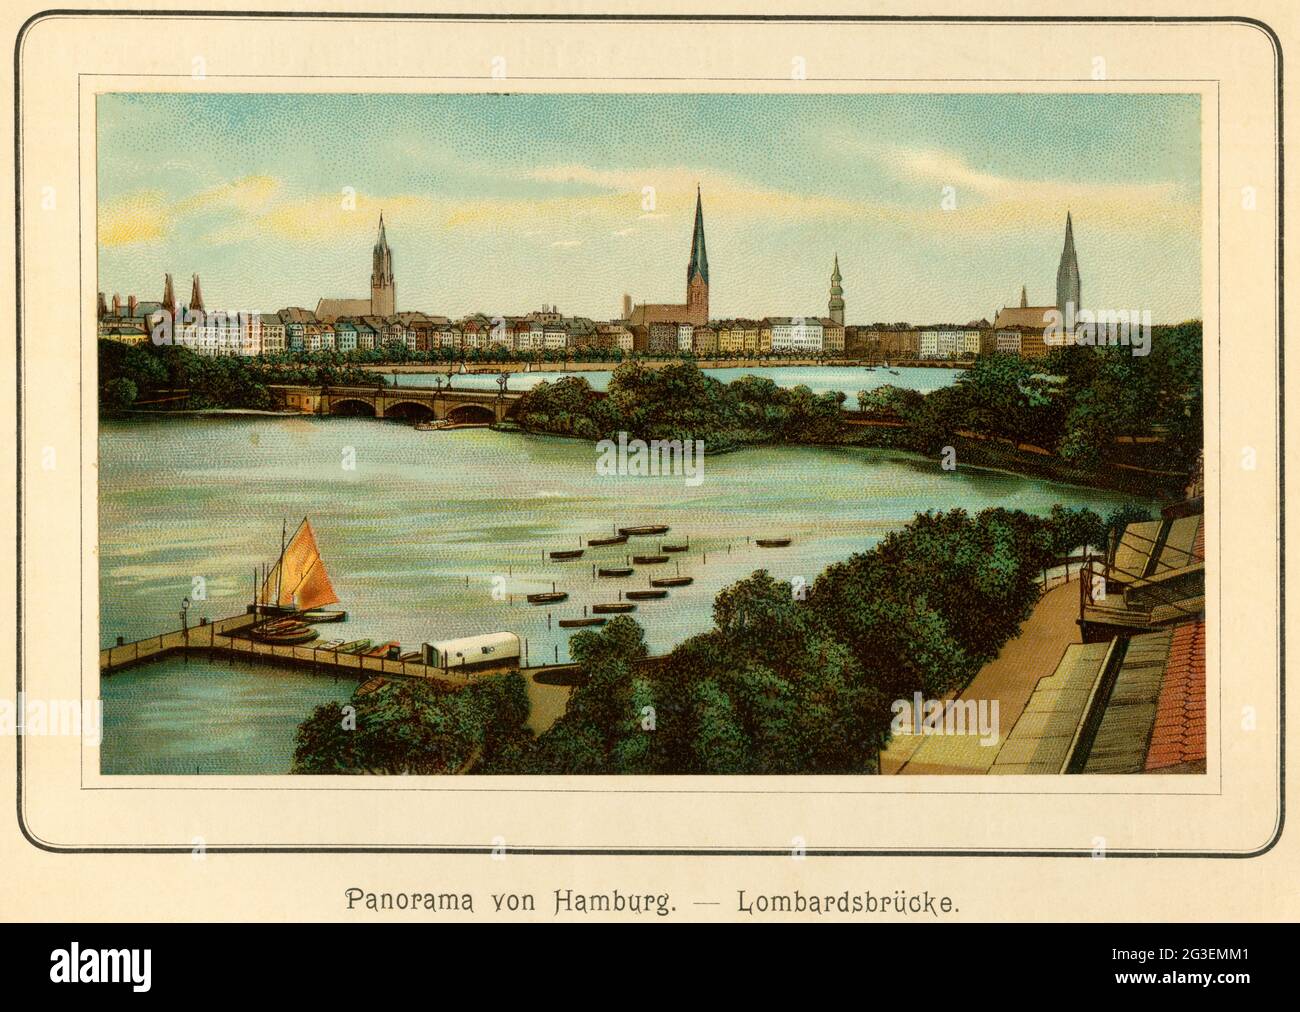 Germany, Hamburg, panorama of Hamburg with lake Alster and the Lombardsbrücke (Lombardsbridge), ADDITIONAL-RIGHTS-CLEARANCE-INFO-NOT-AVAILABLE Stock Photo